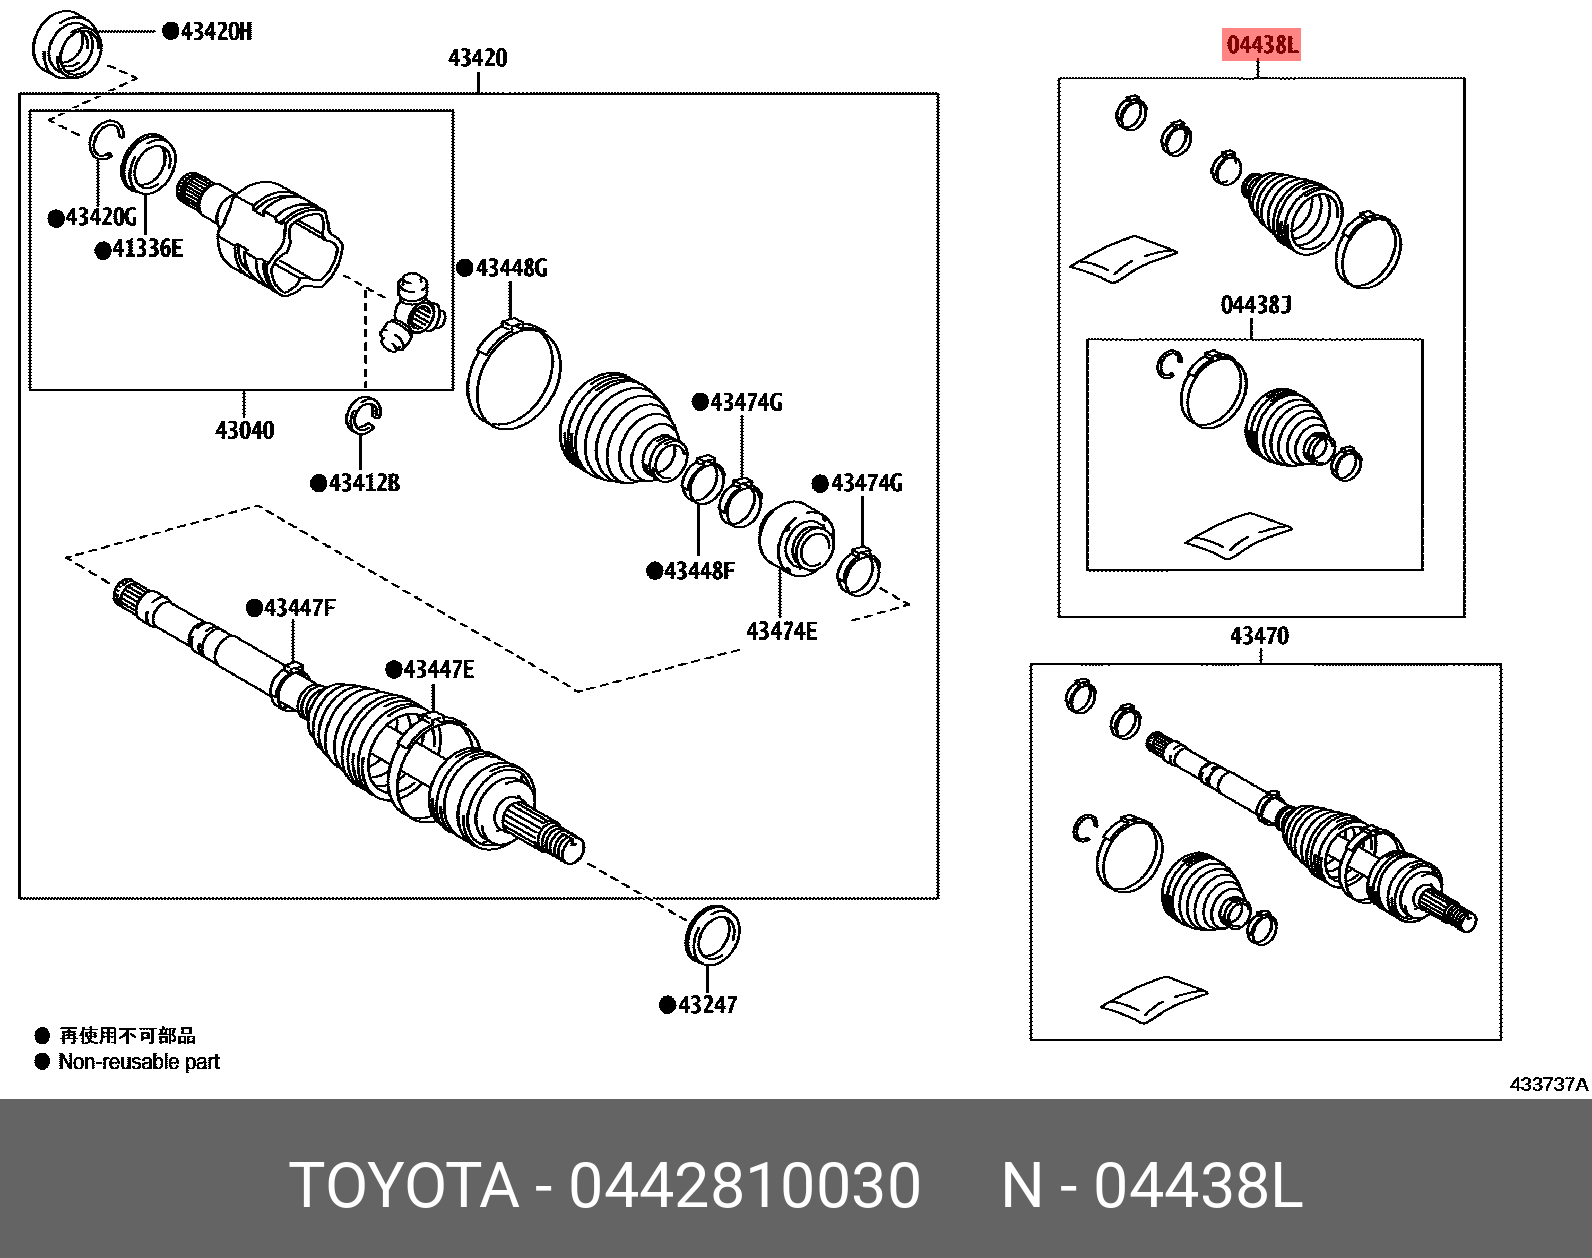 0442810030, COROLLA 201908-, MZEA12, NRE210, ZRE212, ZWE21#, BOOT KIT, FRONT DRIVE SHAFT, IN & OUTBOARD, LH